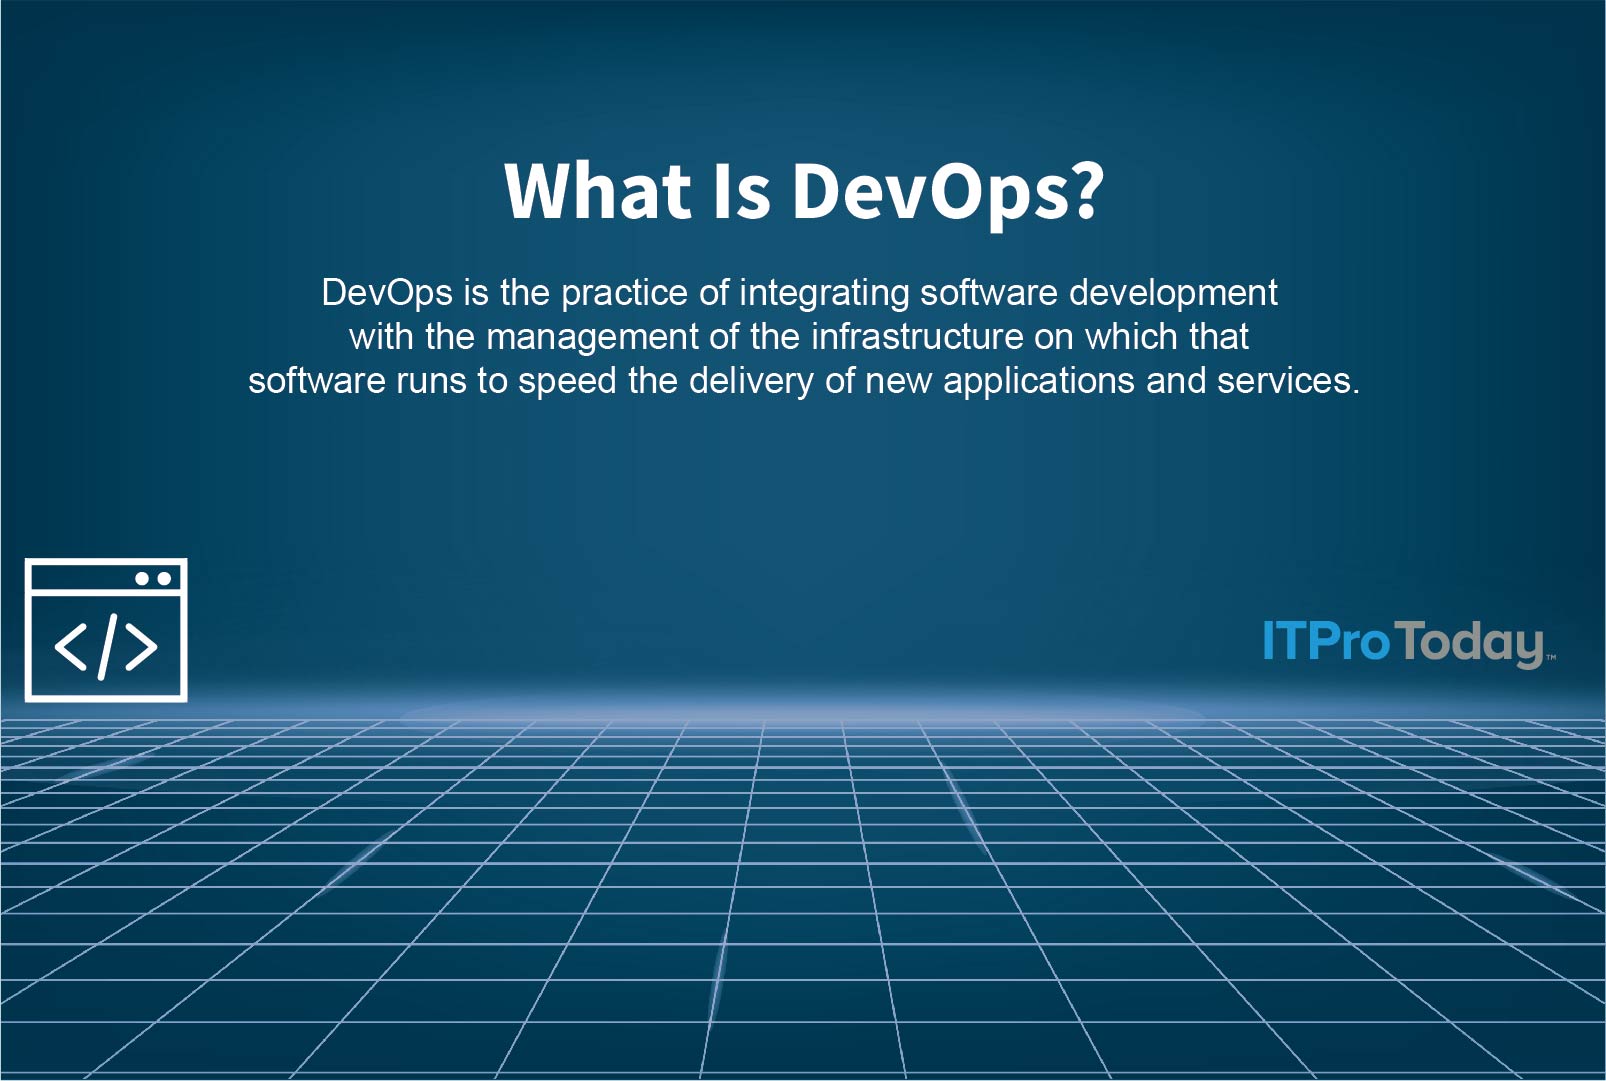 DevOps definition presented by ITPro Today